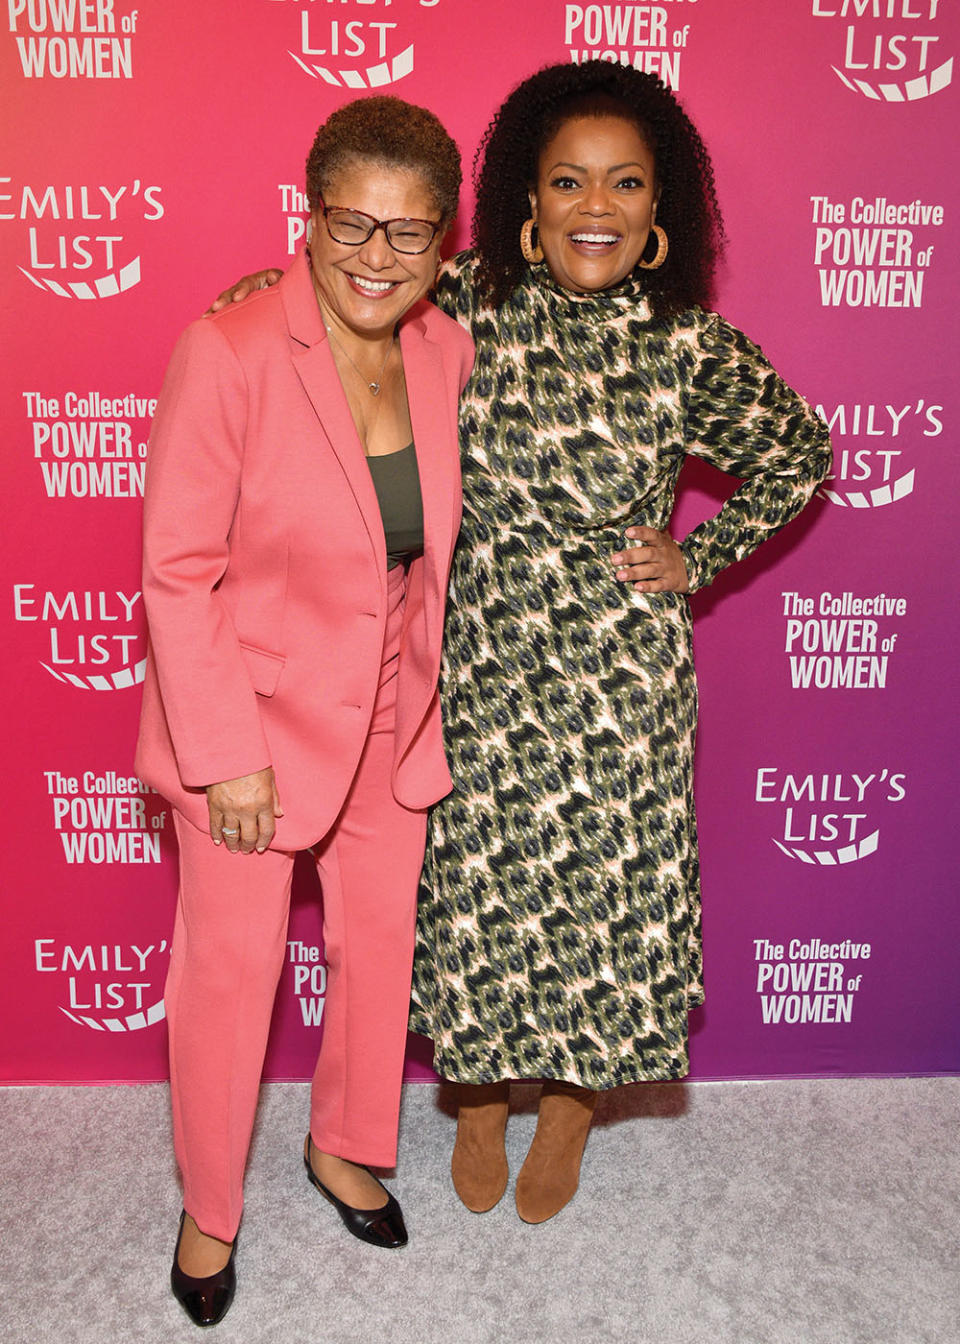 Bass with actress Yvette Nicole Brown (right) at a March 22 Oscars event hosted by Emily’s List, which backs female candidates who support abortion rights. - Credit: Araya Doheny/Getty Images